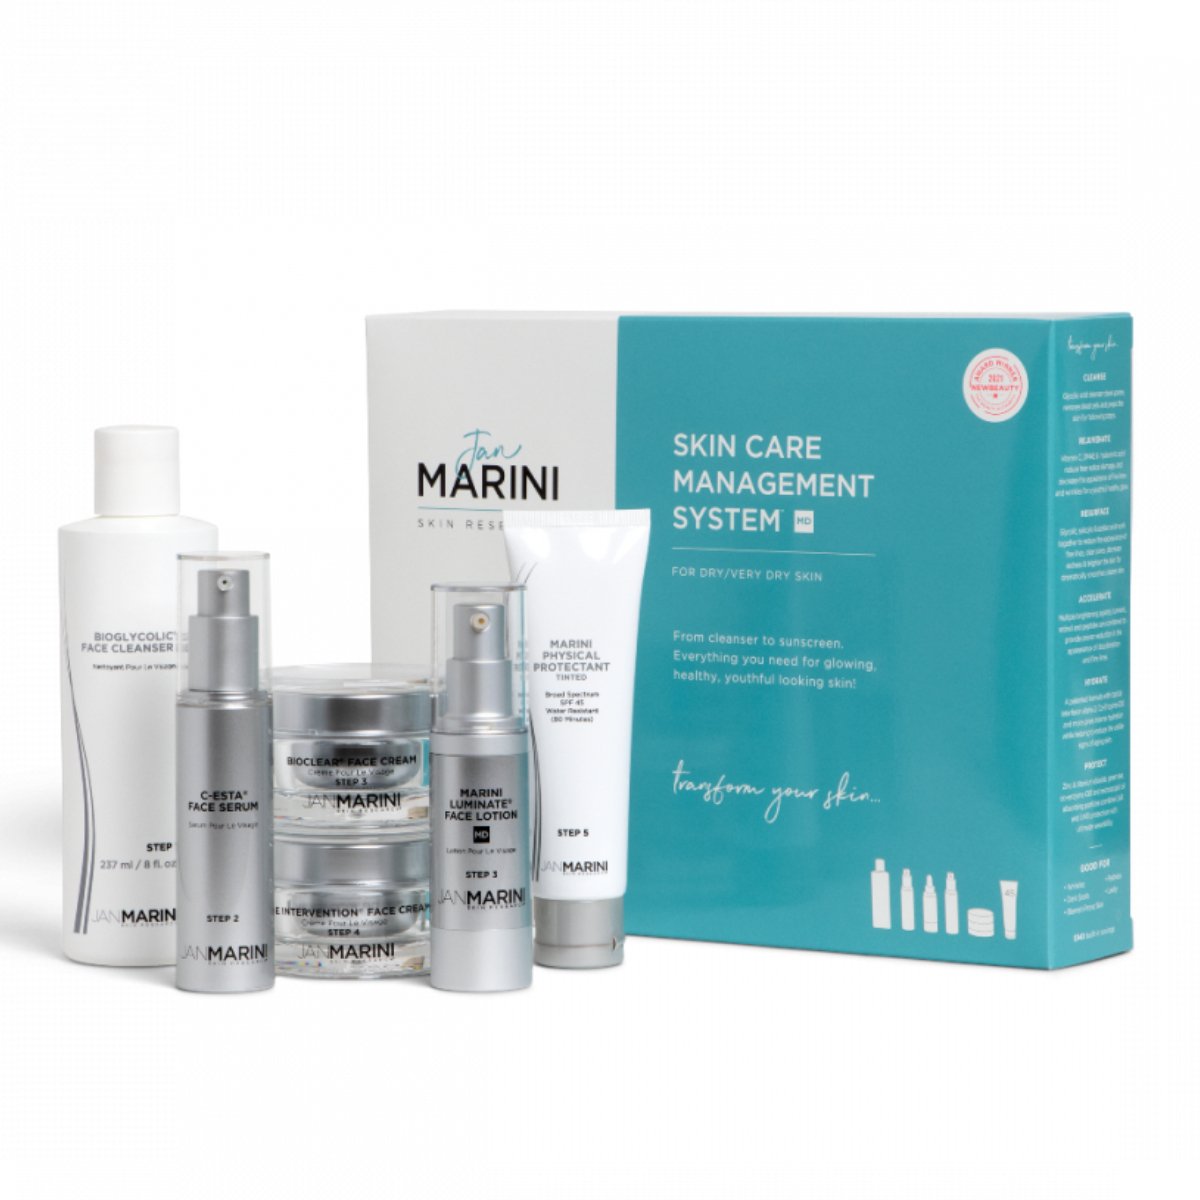 Jan Marini Skin Care Management System MD - Dry/Very Dry w/MPP SPF 45 Tinted